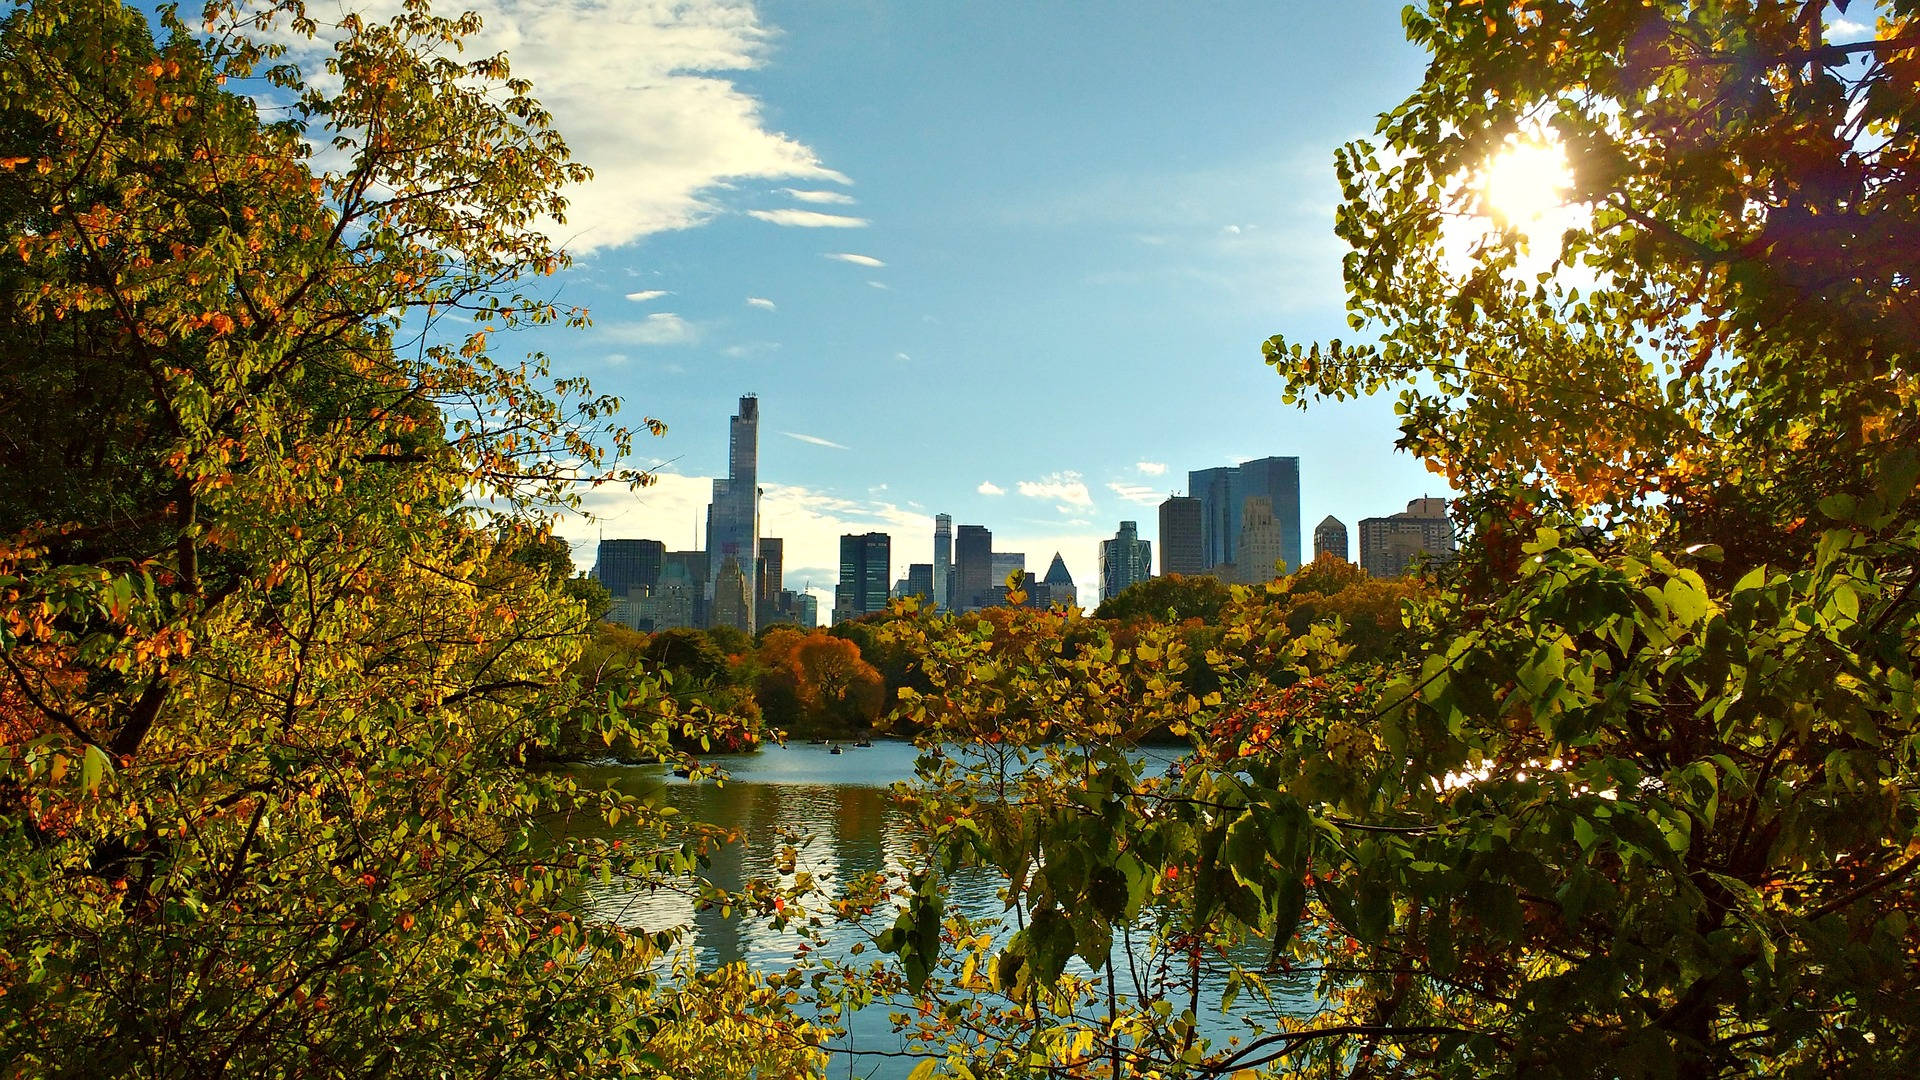 Central Park Cityscape Framed By Trees Wallpaper